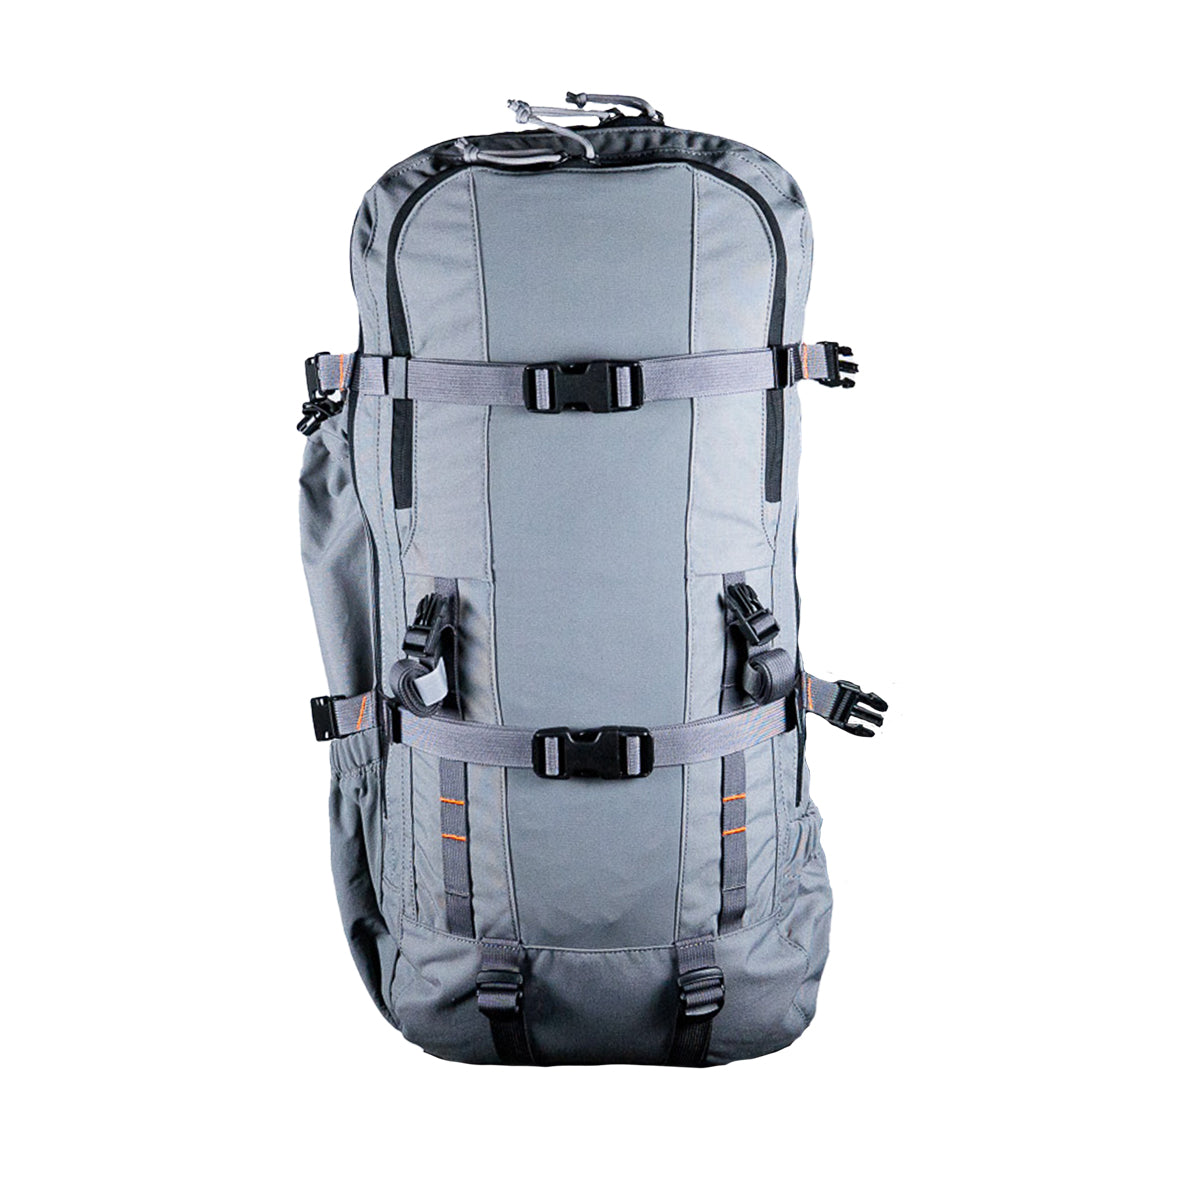 Initial Ascent 3K Bag Only